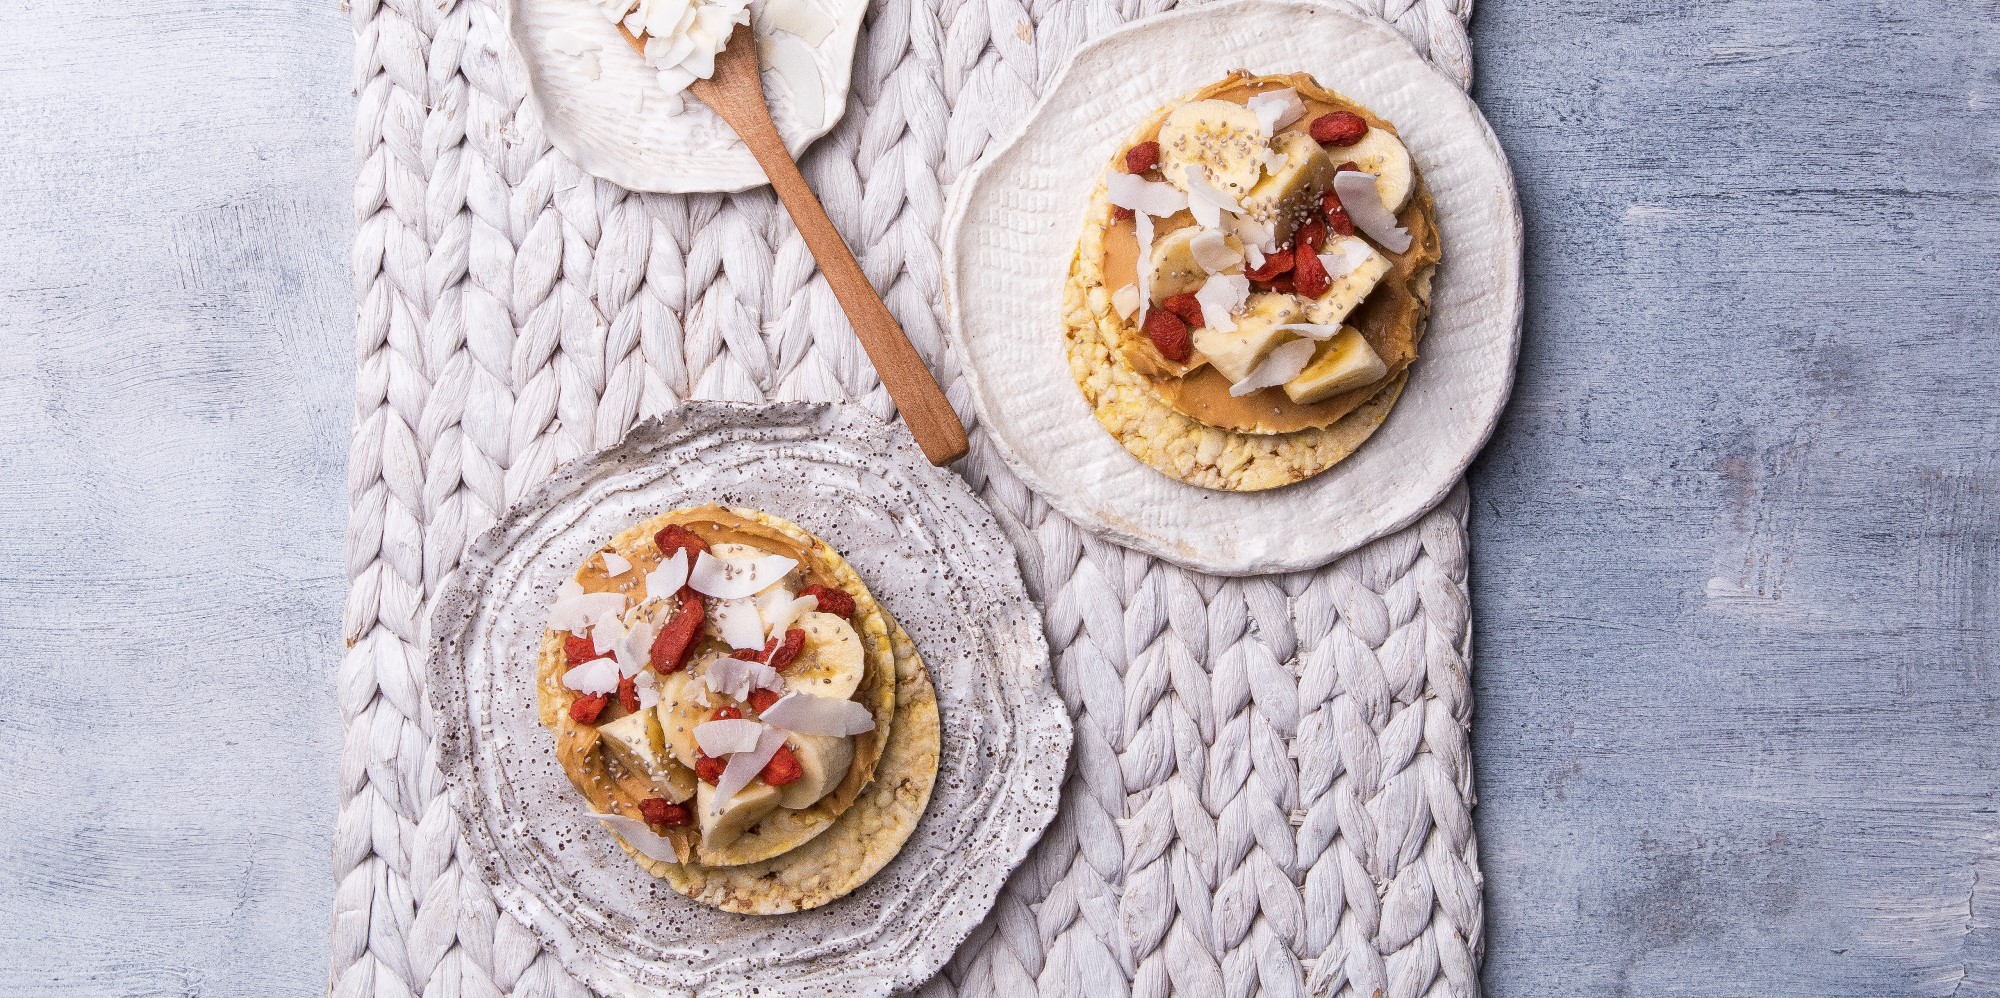 Peanut butter, banana, goji berries, coconut flakes & chia seeds on Corn Thins slices